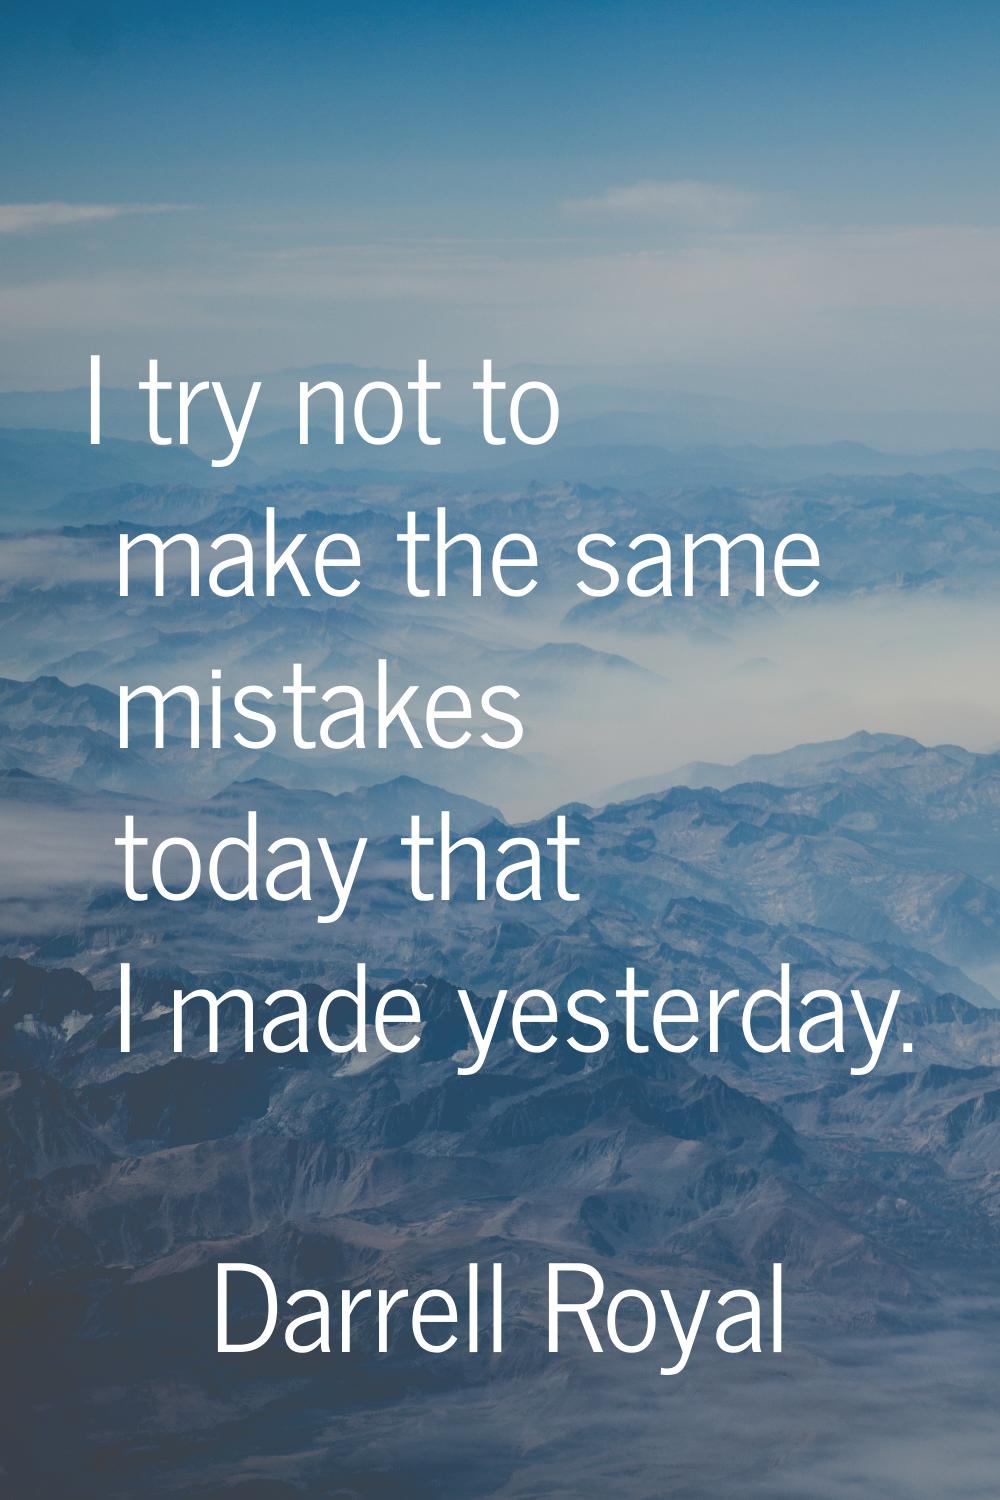 I try not to make the same mistakes today that I made yesterday.